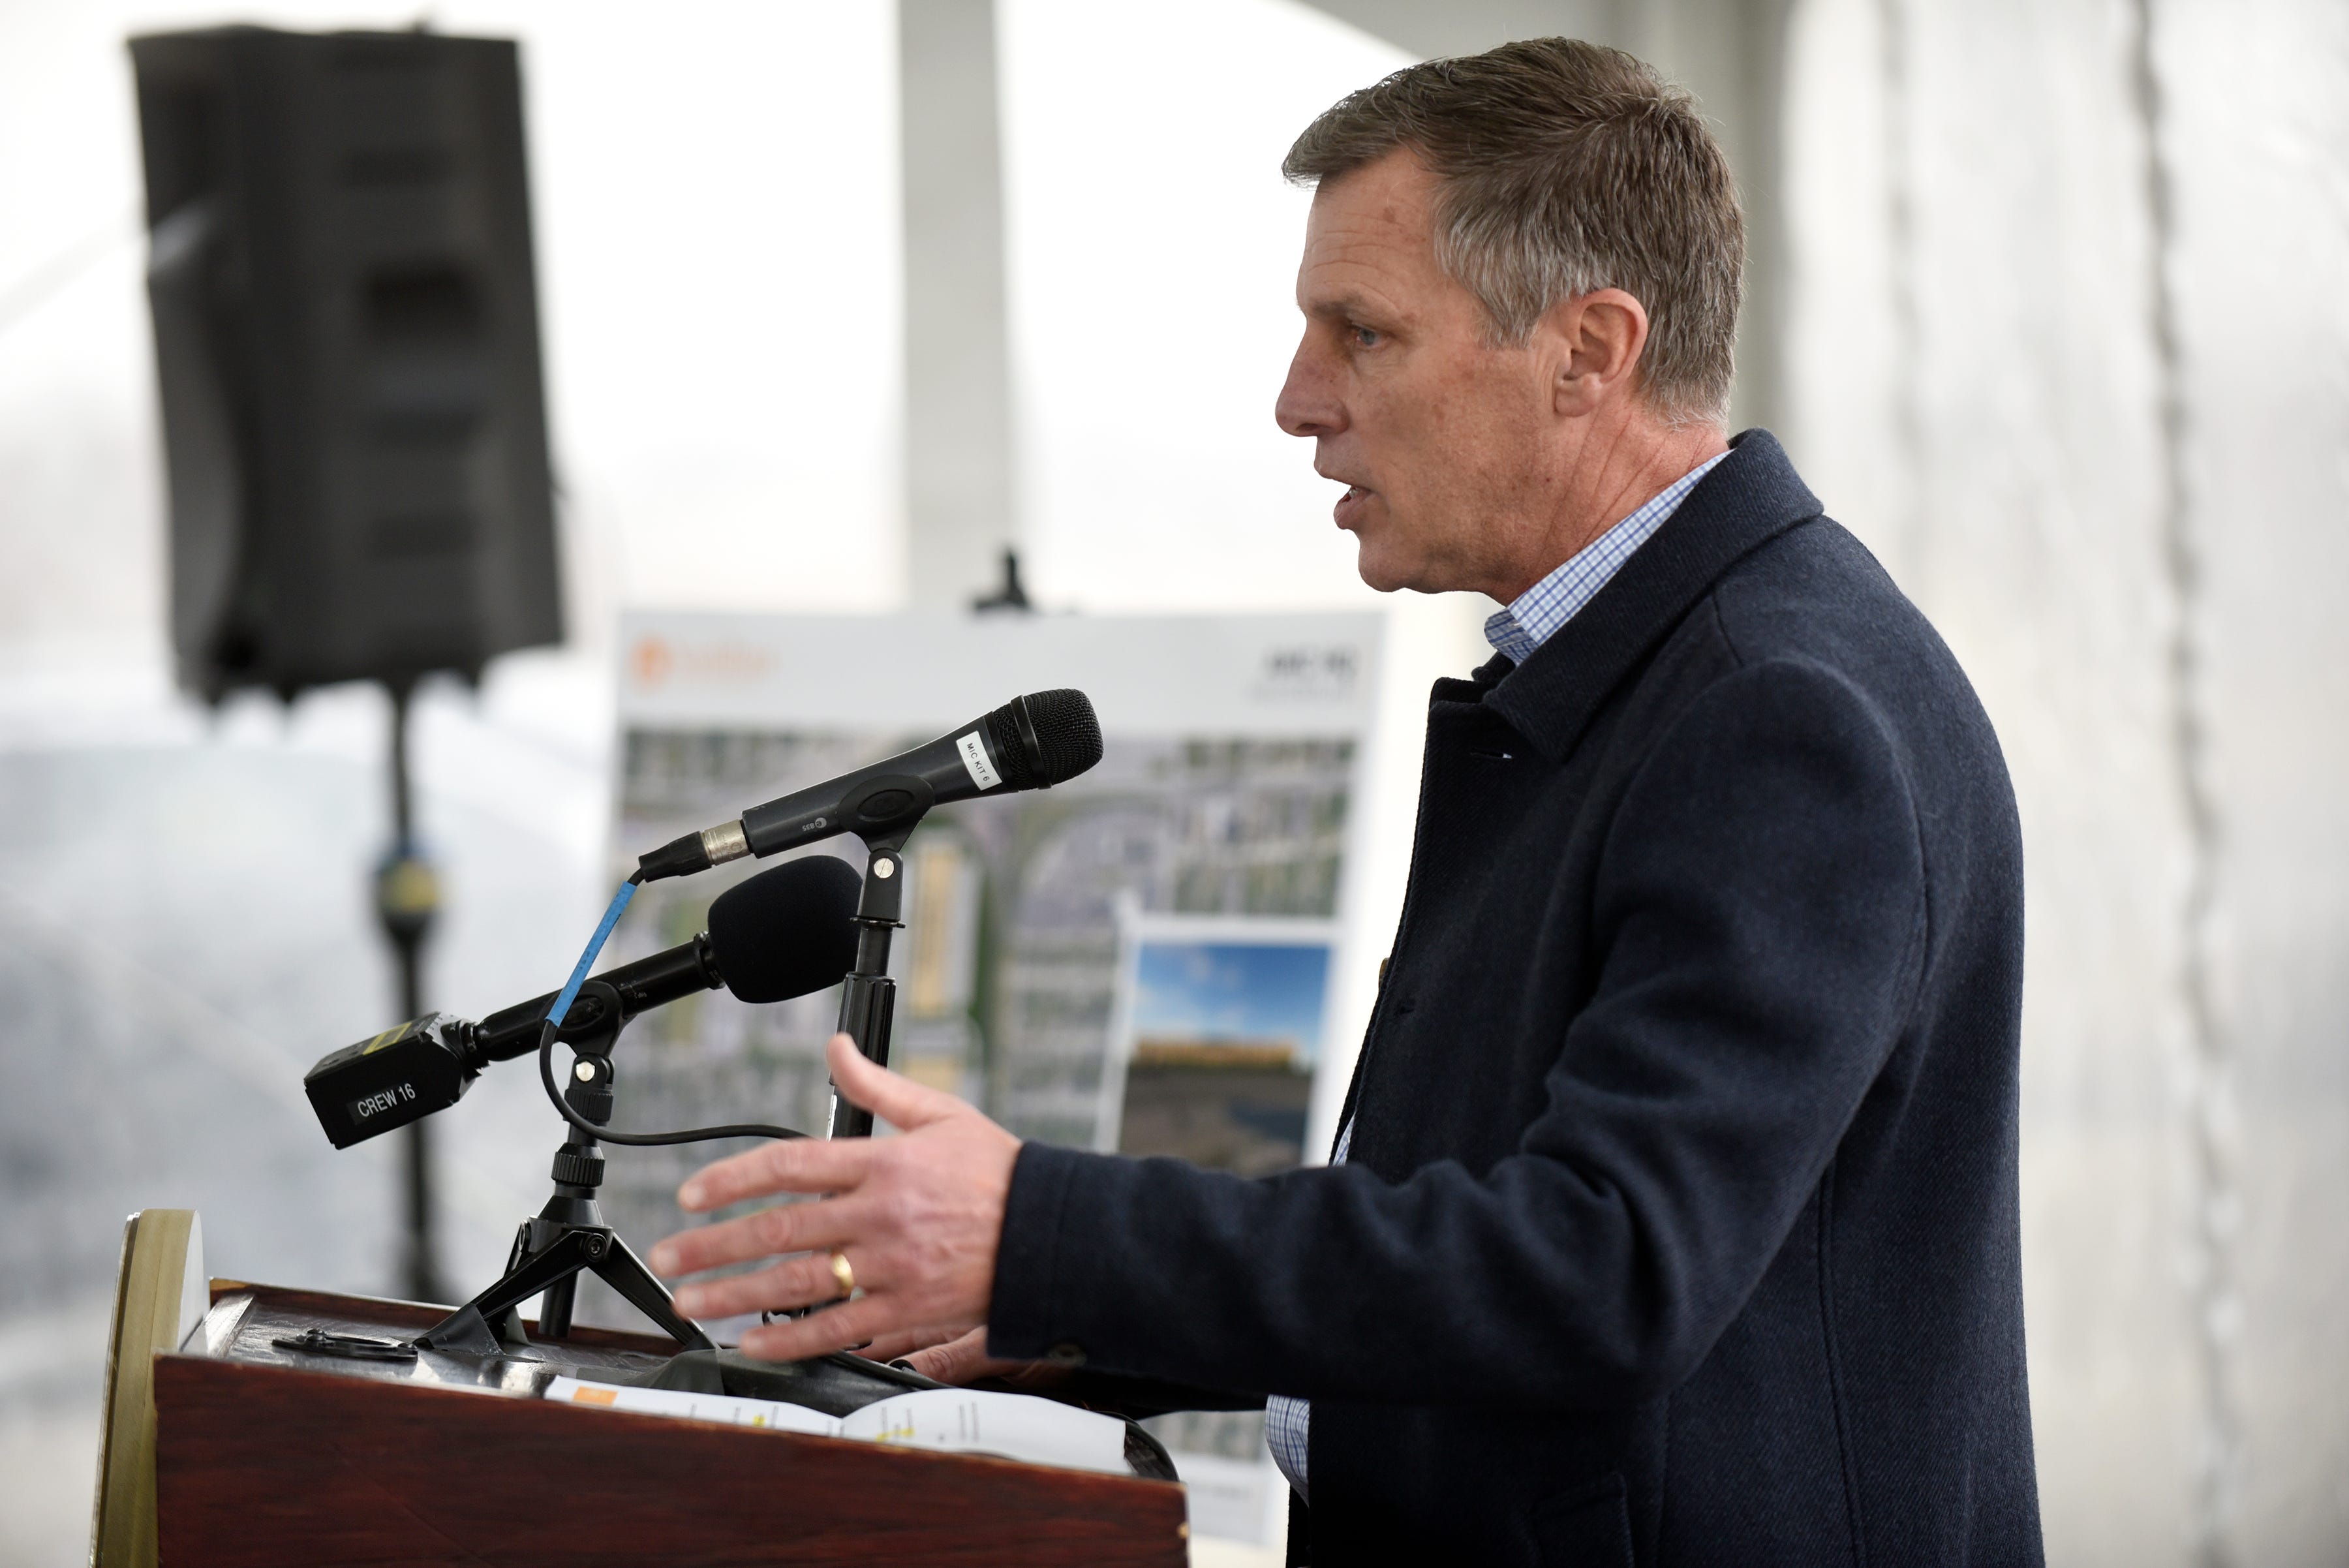 Tim Condor, vice president of acquisitions for NorthPoint Development, speaks during a press conference at the former headquarters of the American Motor Corporation in Detroit on Thursday, Dec. 9, 2021.